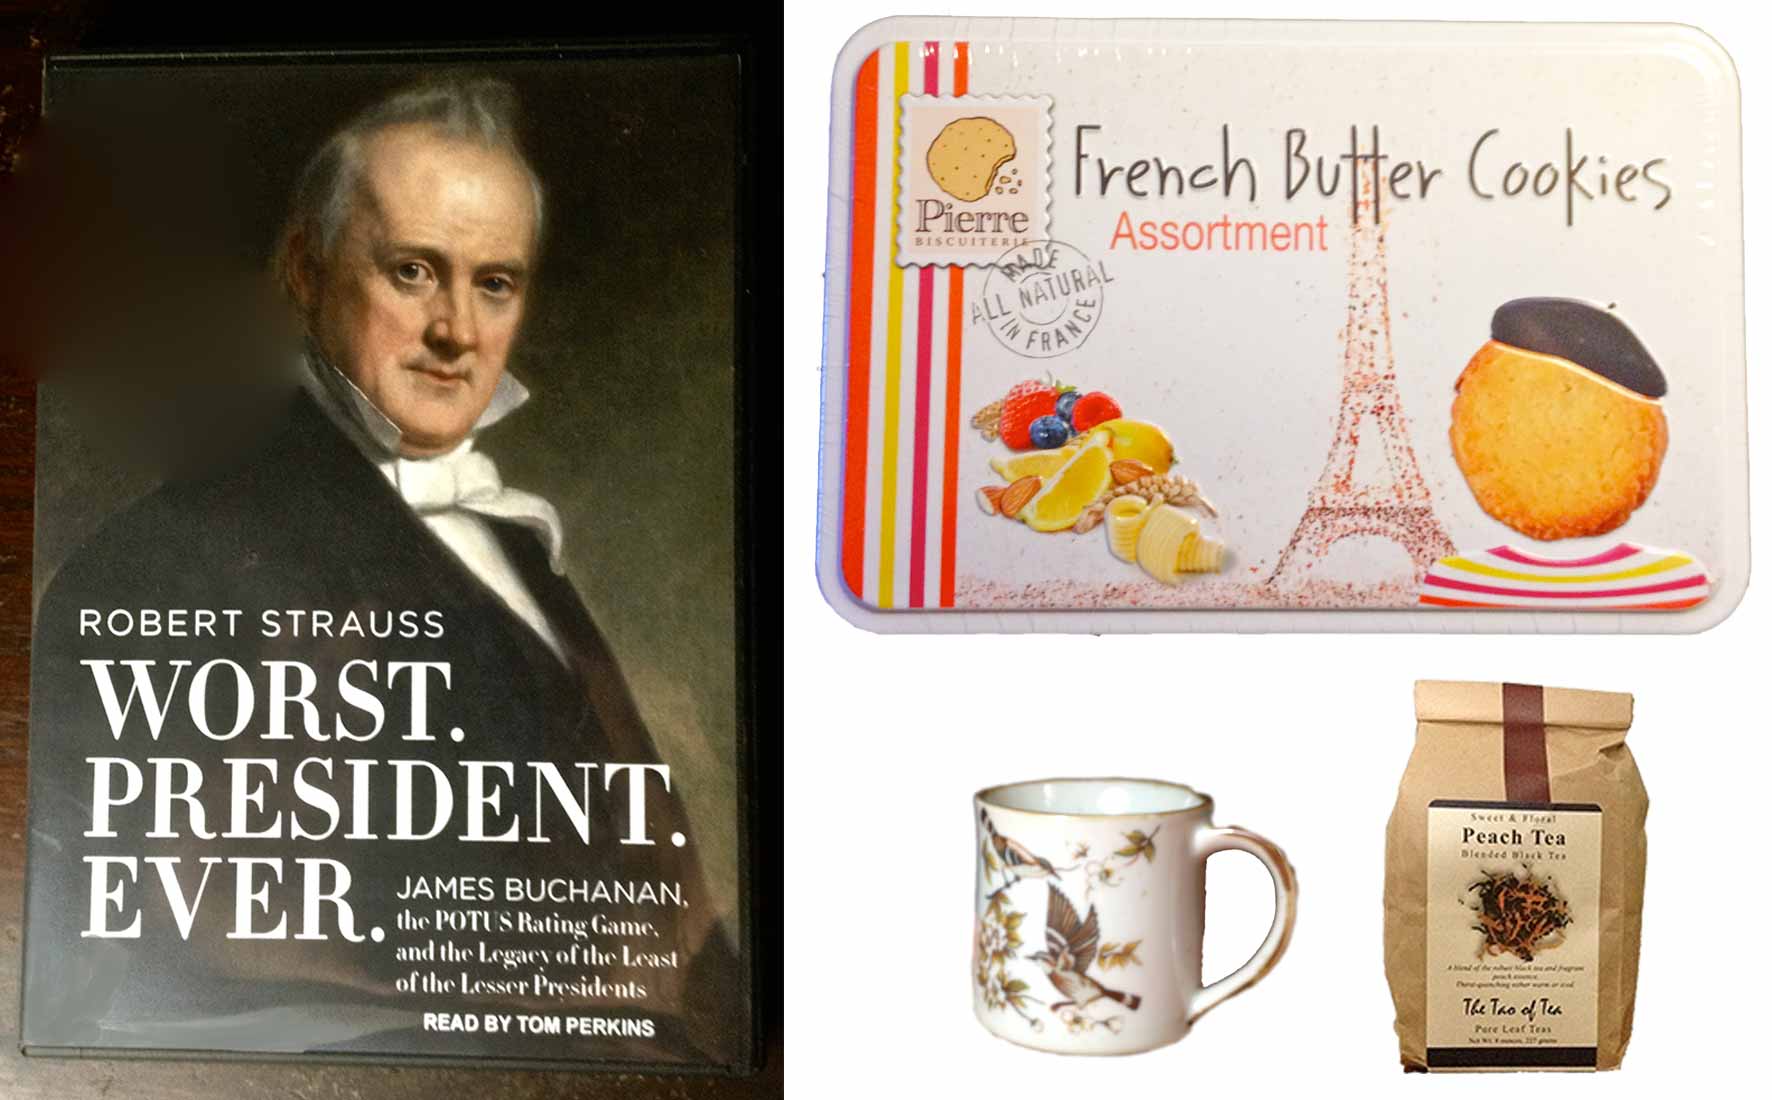 composite image with case cover audiobook WORST. PRESIDENT. EVER. a contaiiner of French butter cookies, a mug of tea, and a package of The Tao of Tea peach-flavored black tea